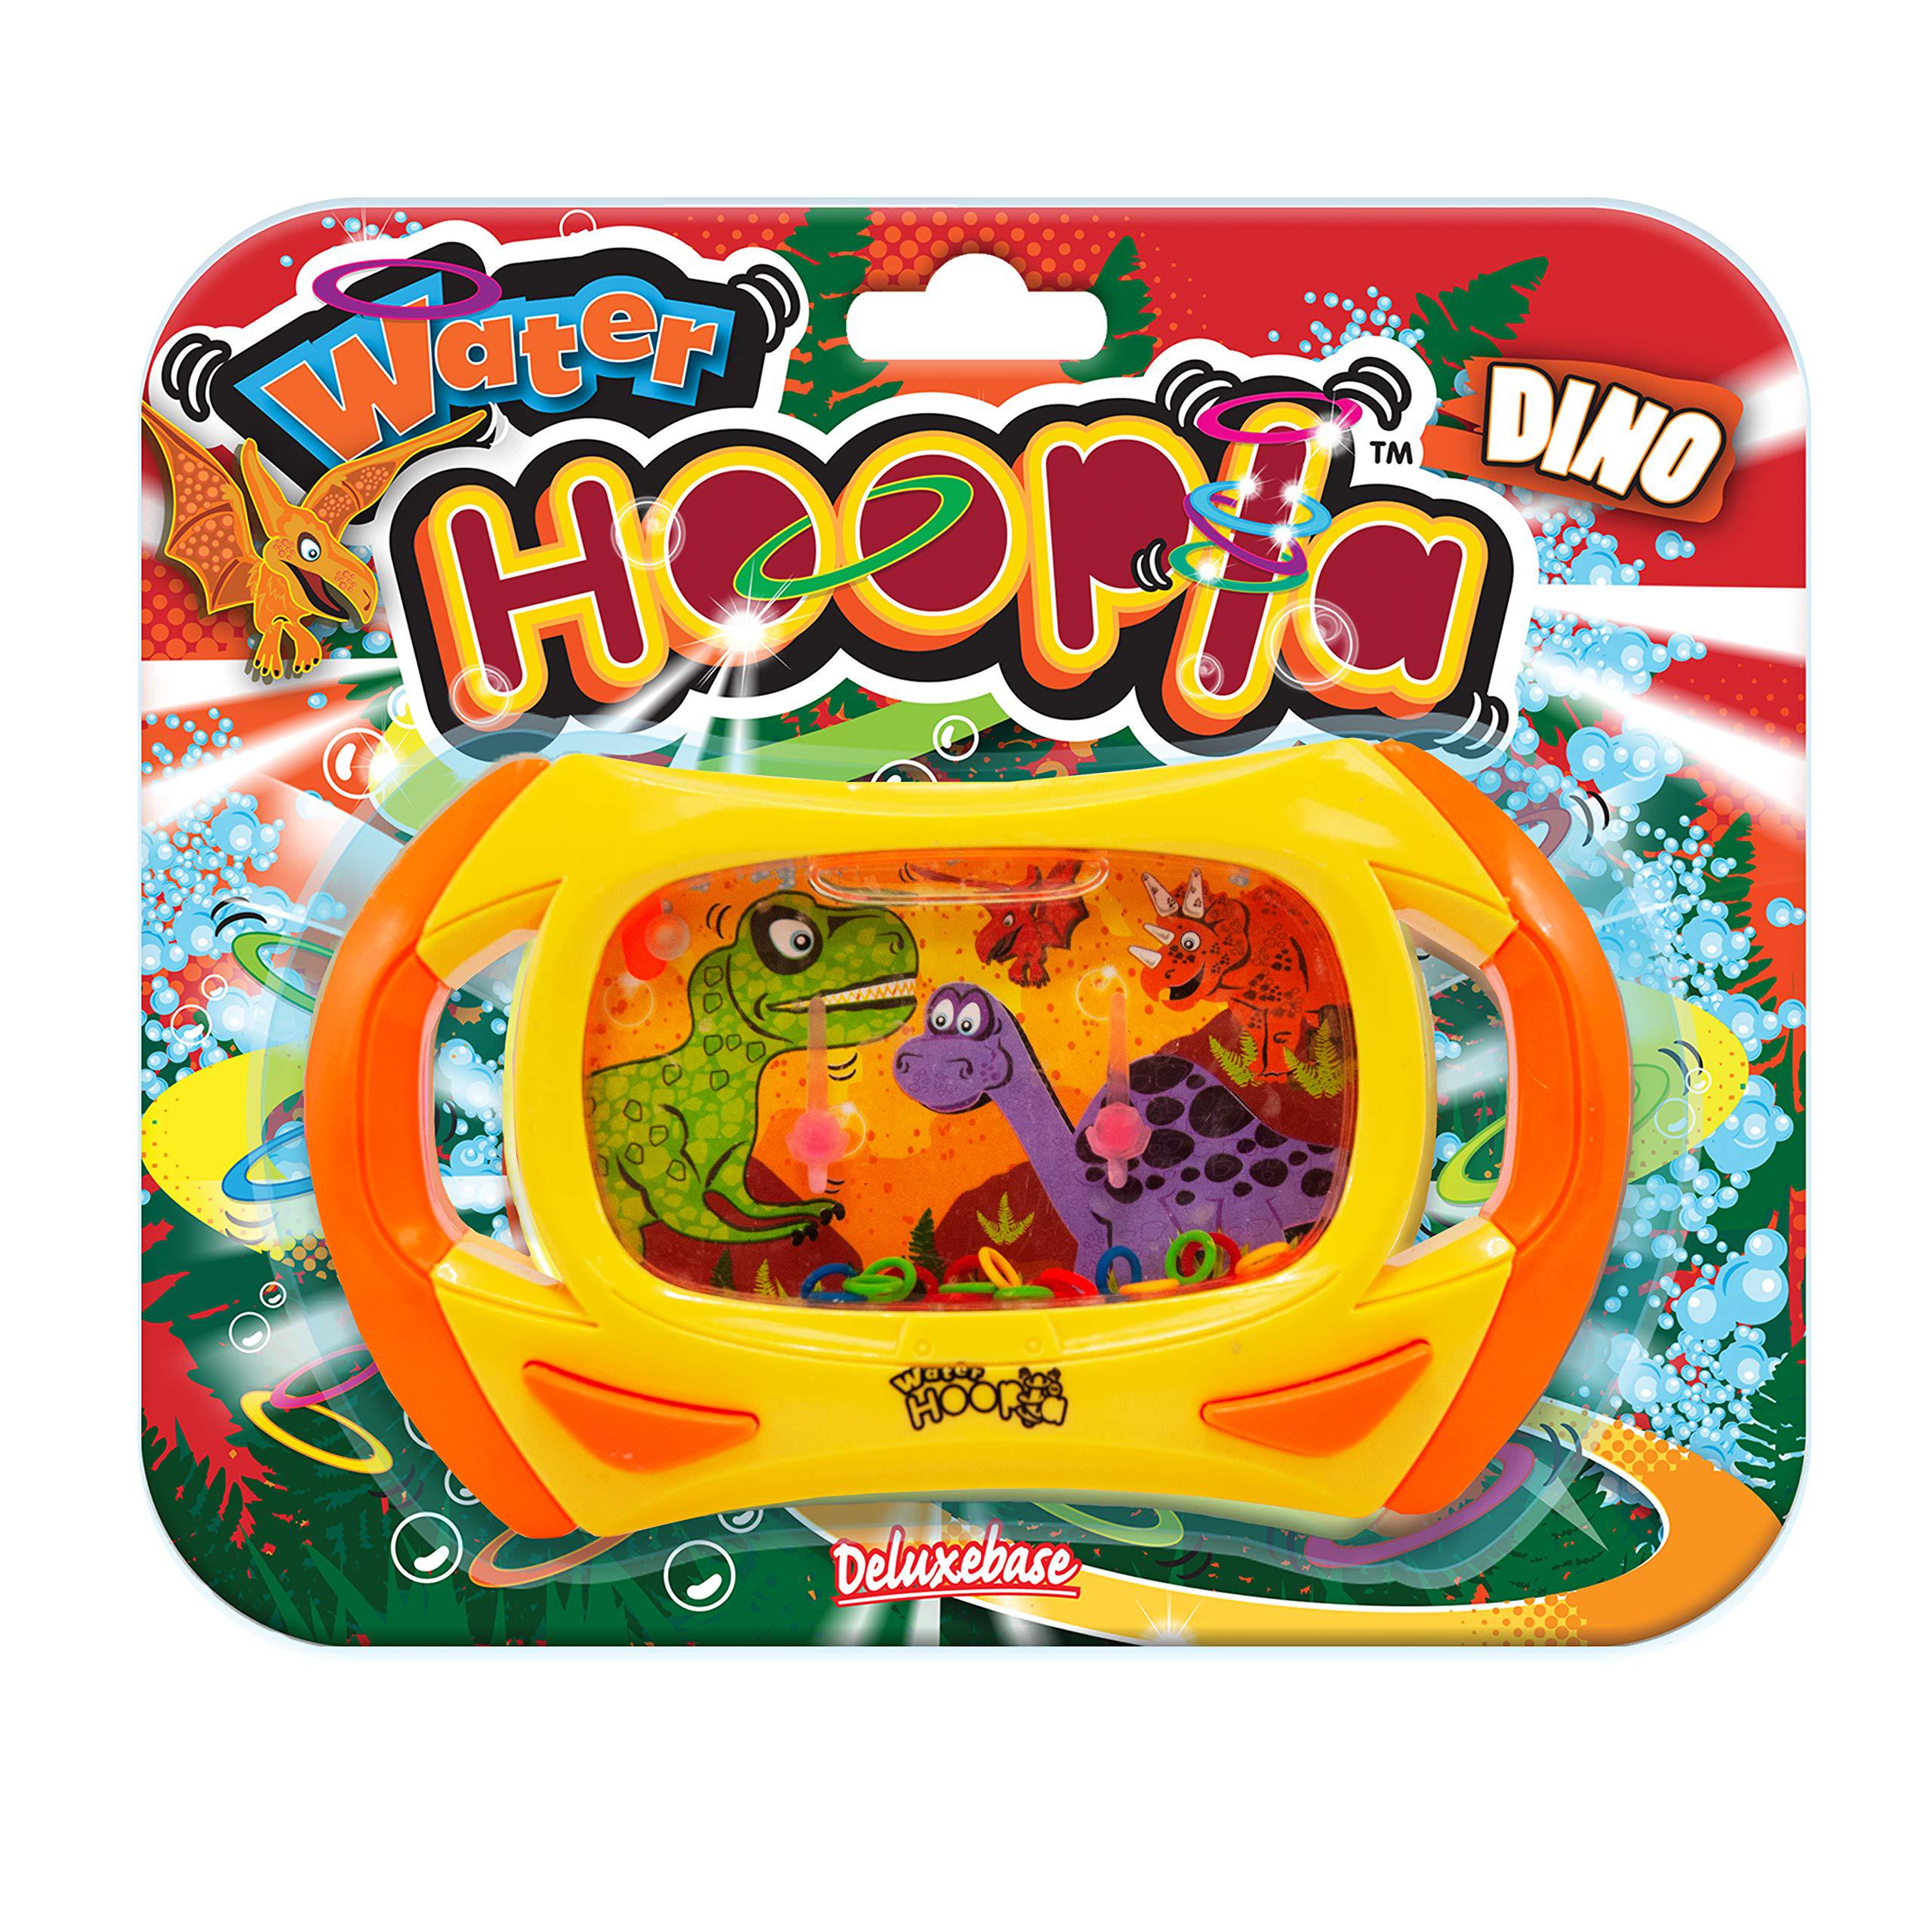 water hoopla - dinosaur from deluxebase. jurassic retro toys water handheld game. ring toss hand held mini arcade games for k